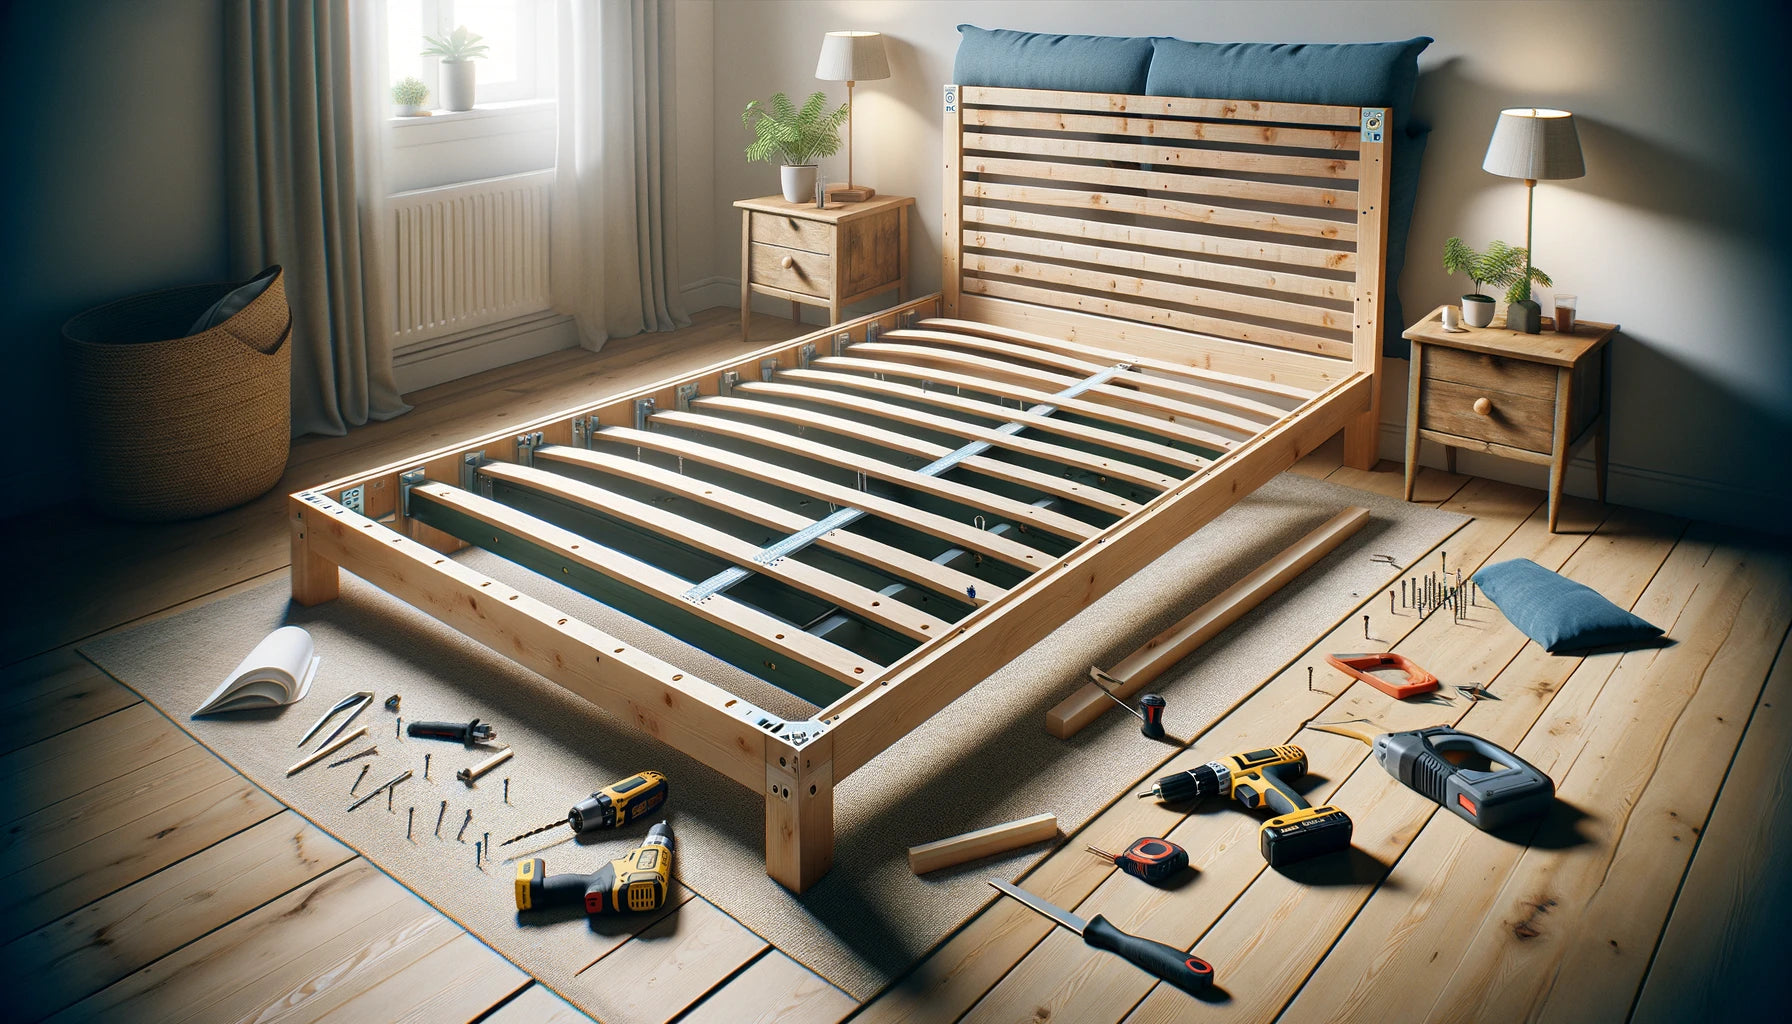 How to Make Center Support for Bed Frame: A DIY Guide